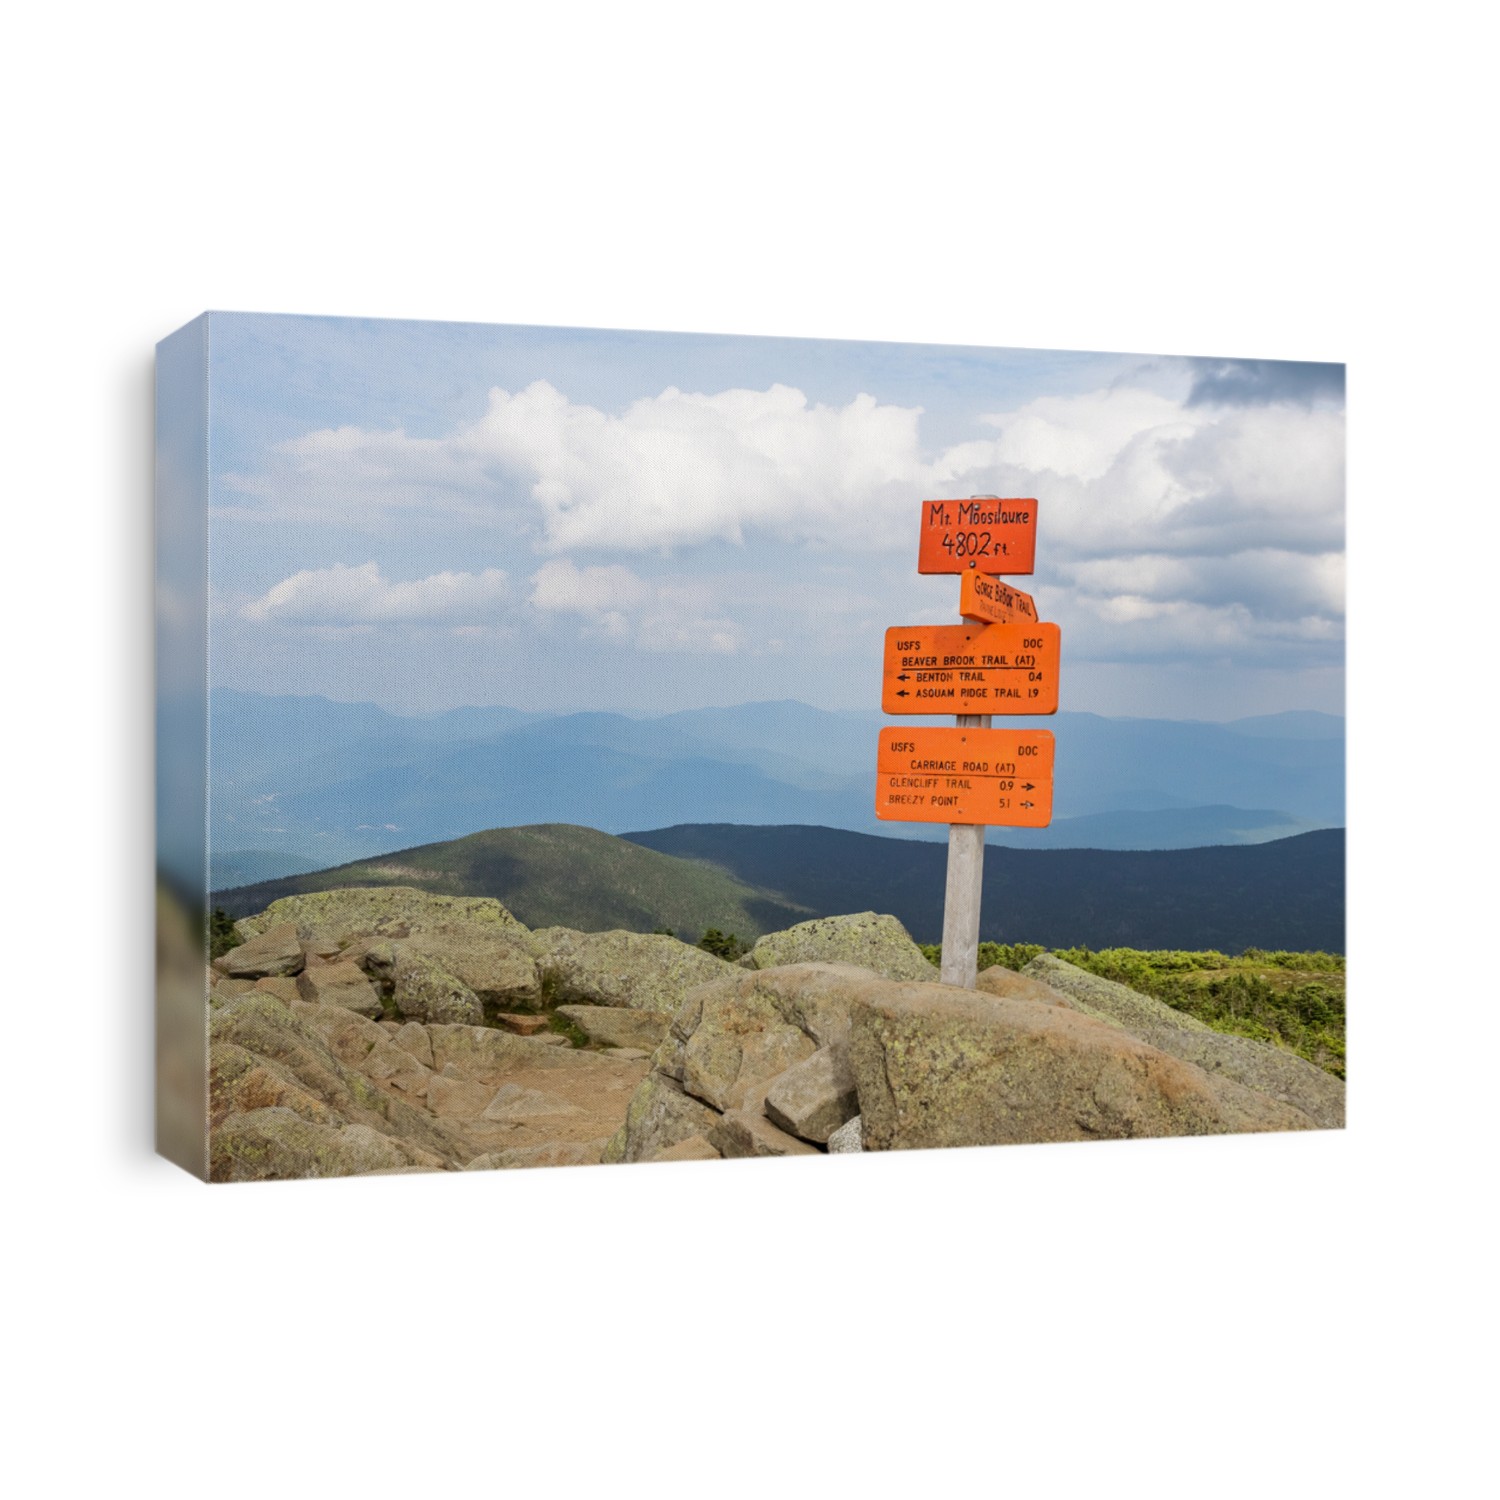 View from Mount Moosilauke in the White Mountains, New Hampshire, USA.